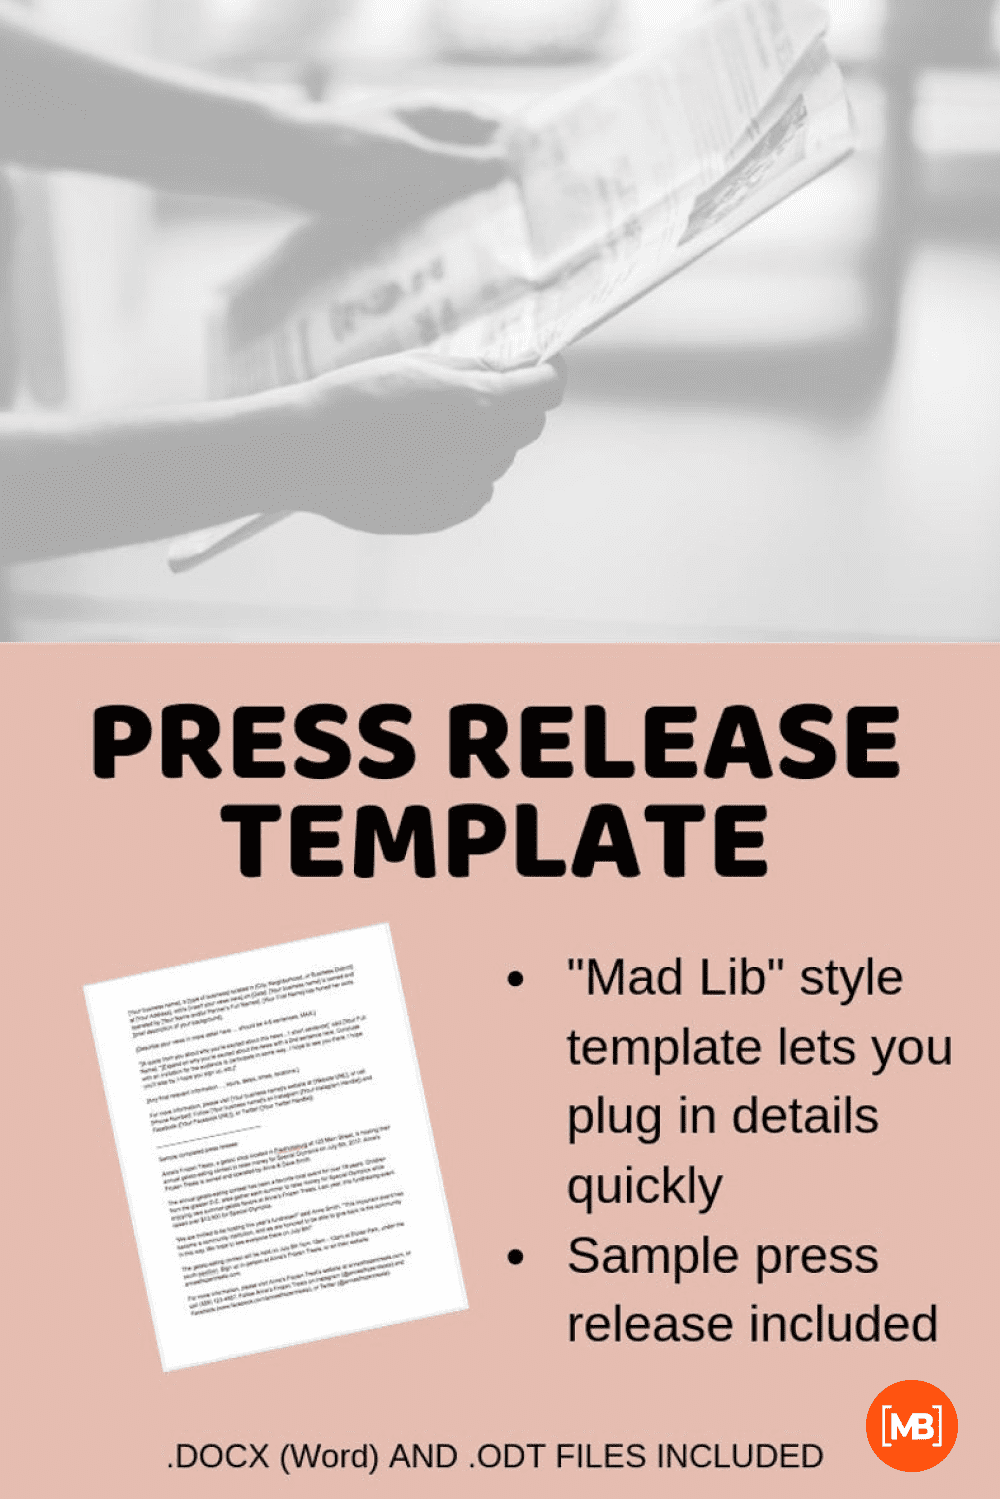 Press release in pastel colors and bold.